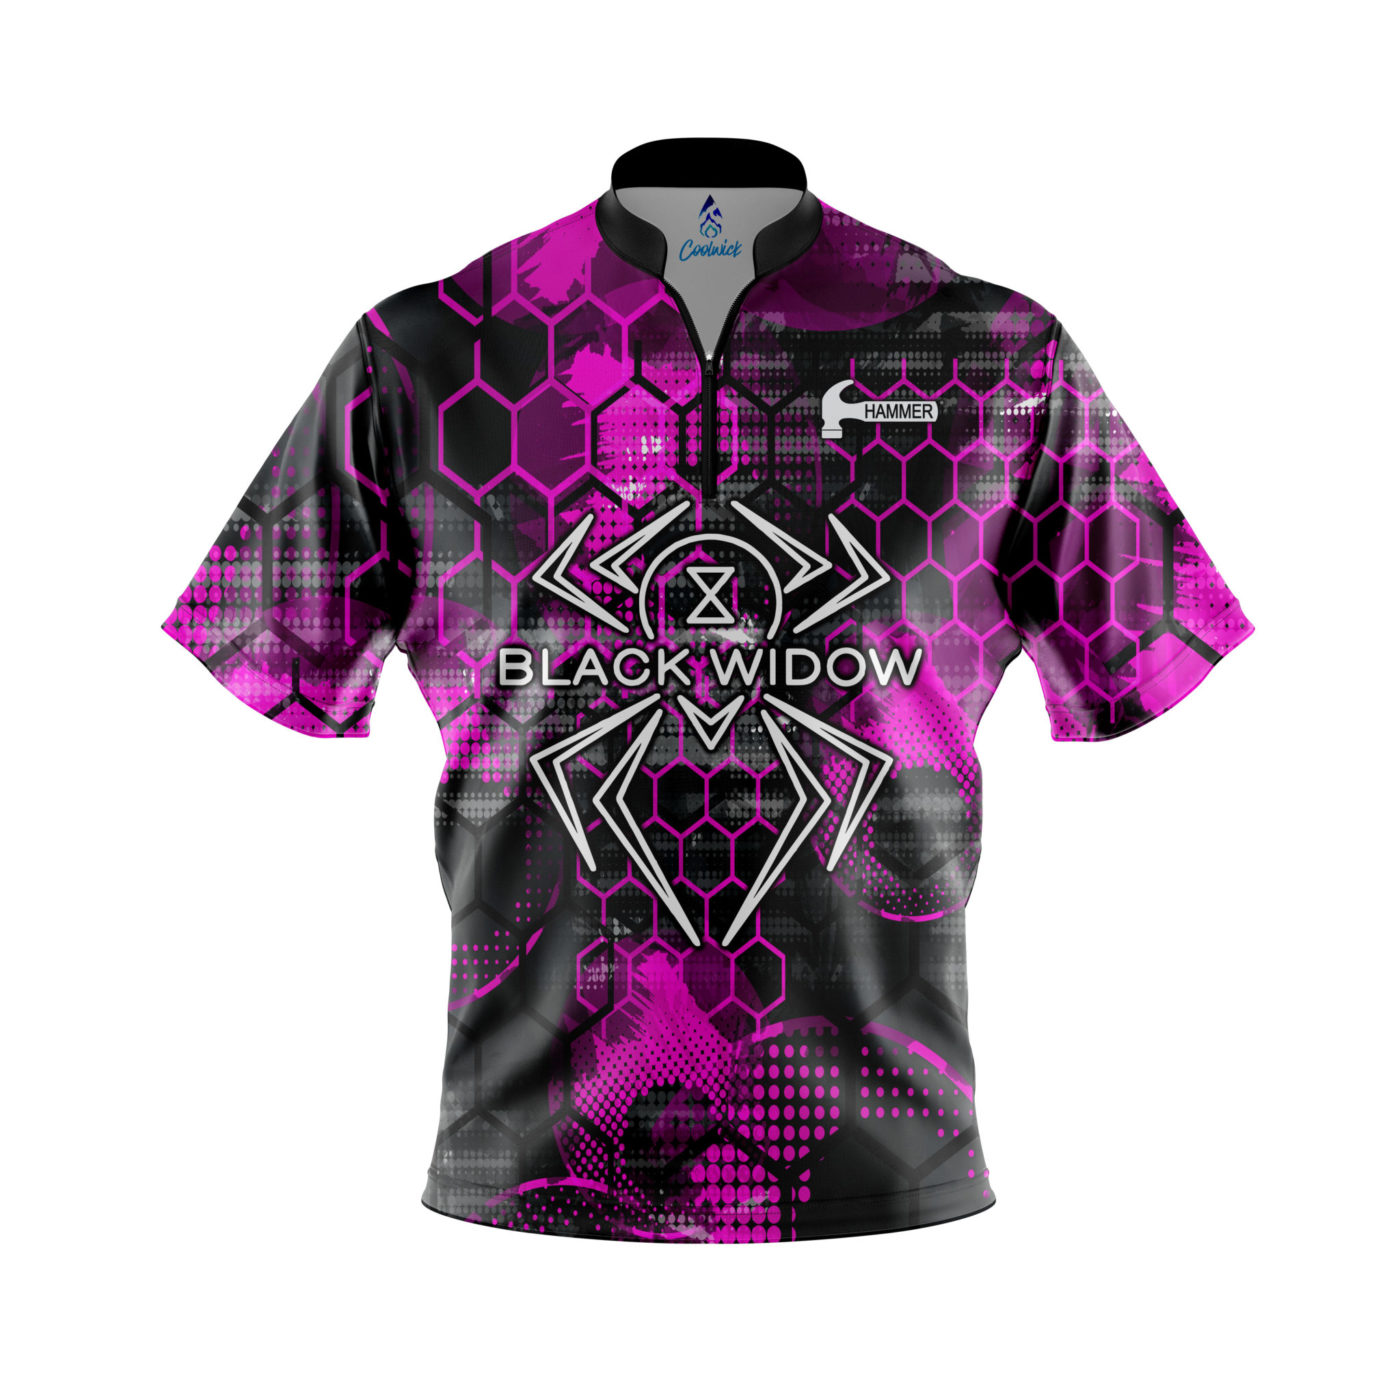 Do these bowling shirts have a fitted style to them, or are they a regular fit; which allows for comfortability?